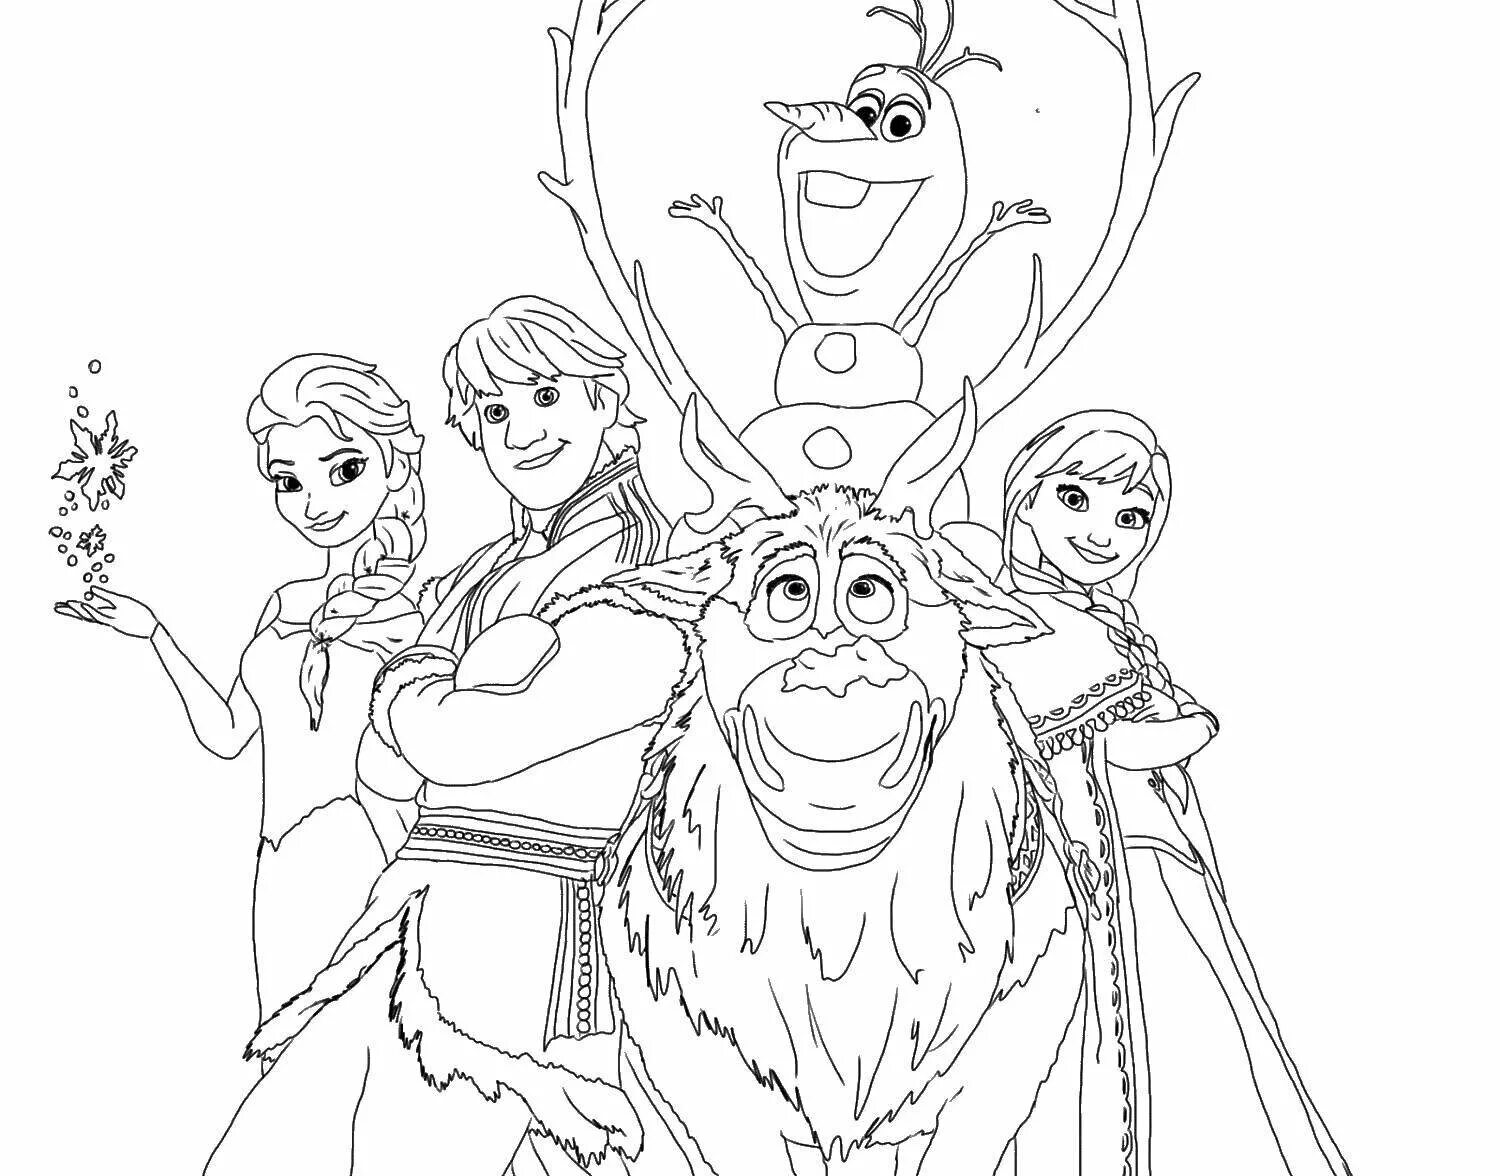 Frozen coloring page #3